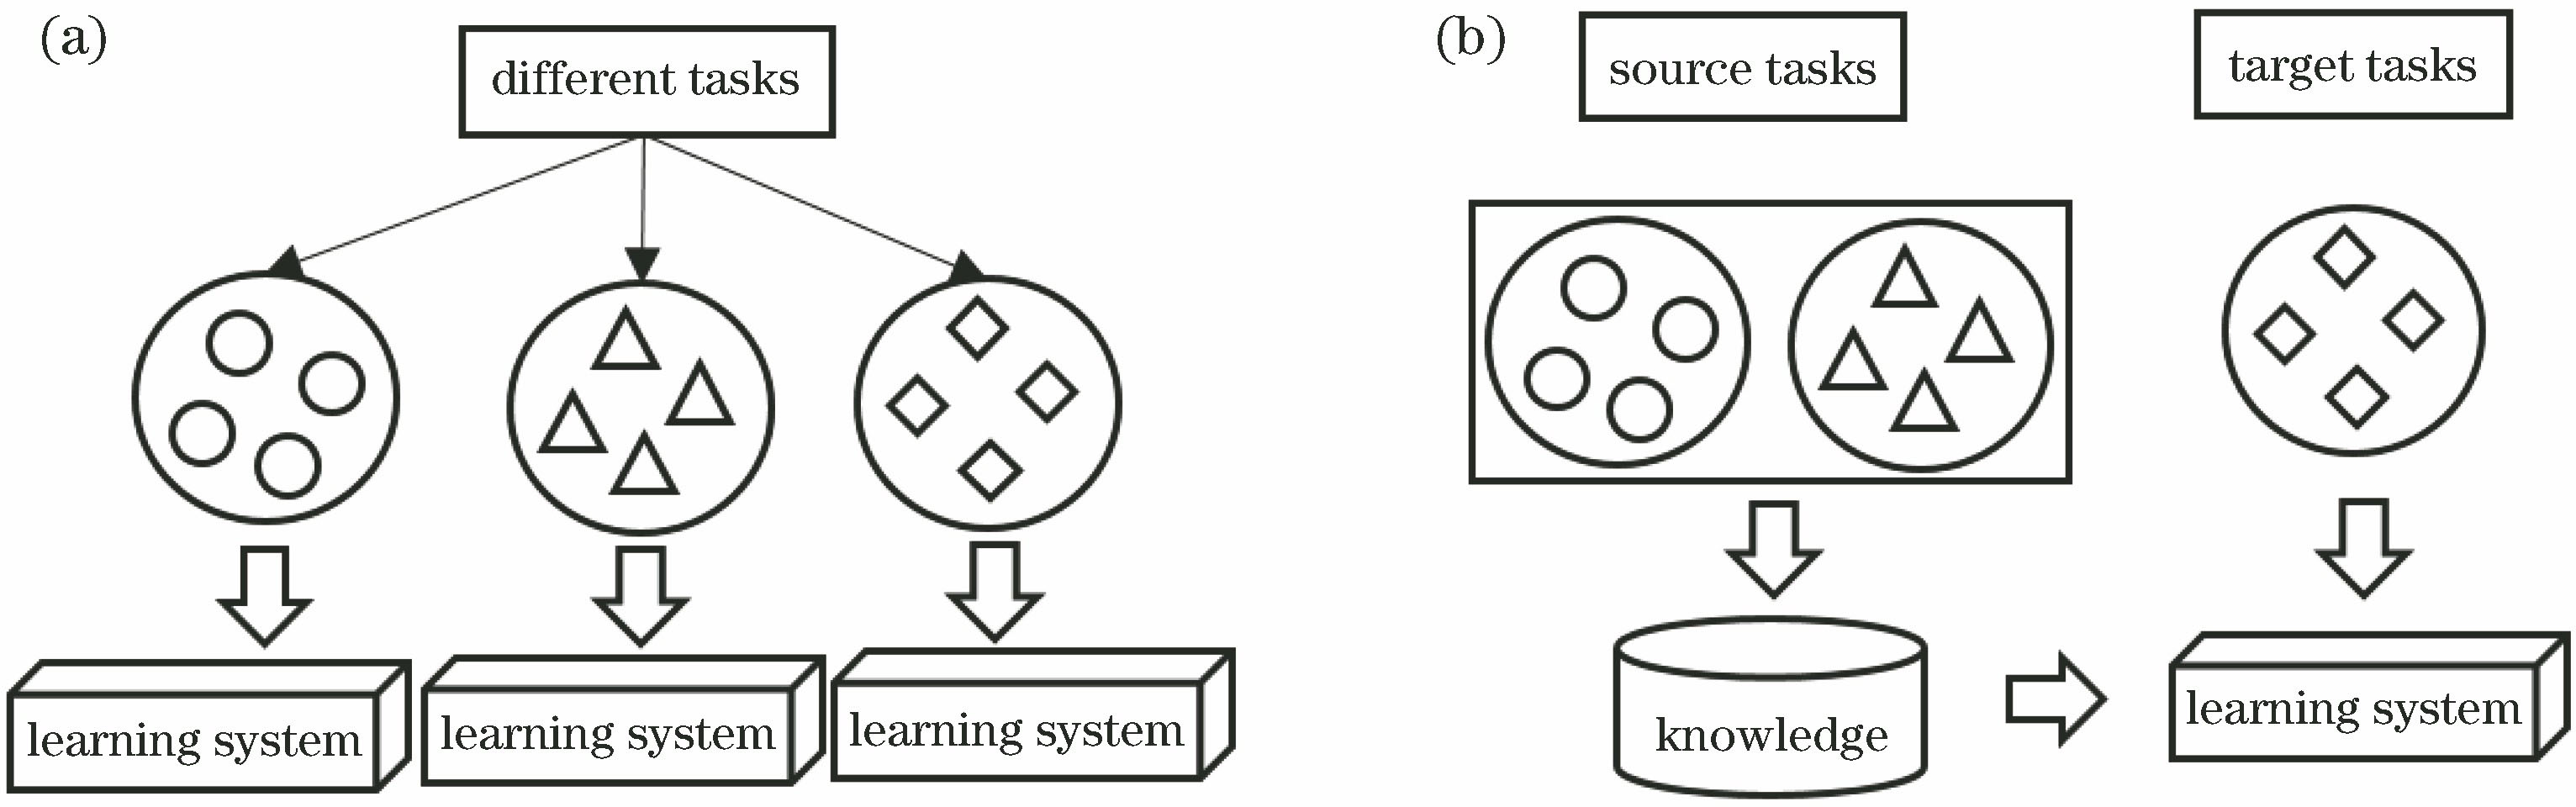 Comparison between traditional machine learning and transfer learning. (a) Traditional machine learning; (b) transfer learning